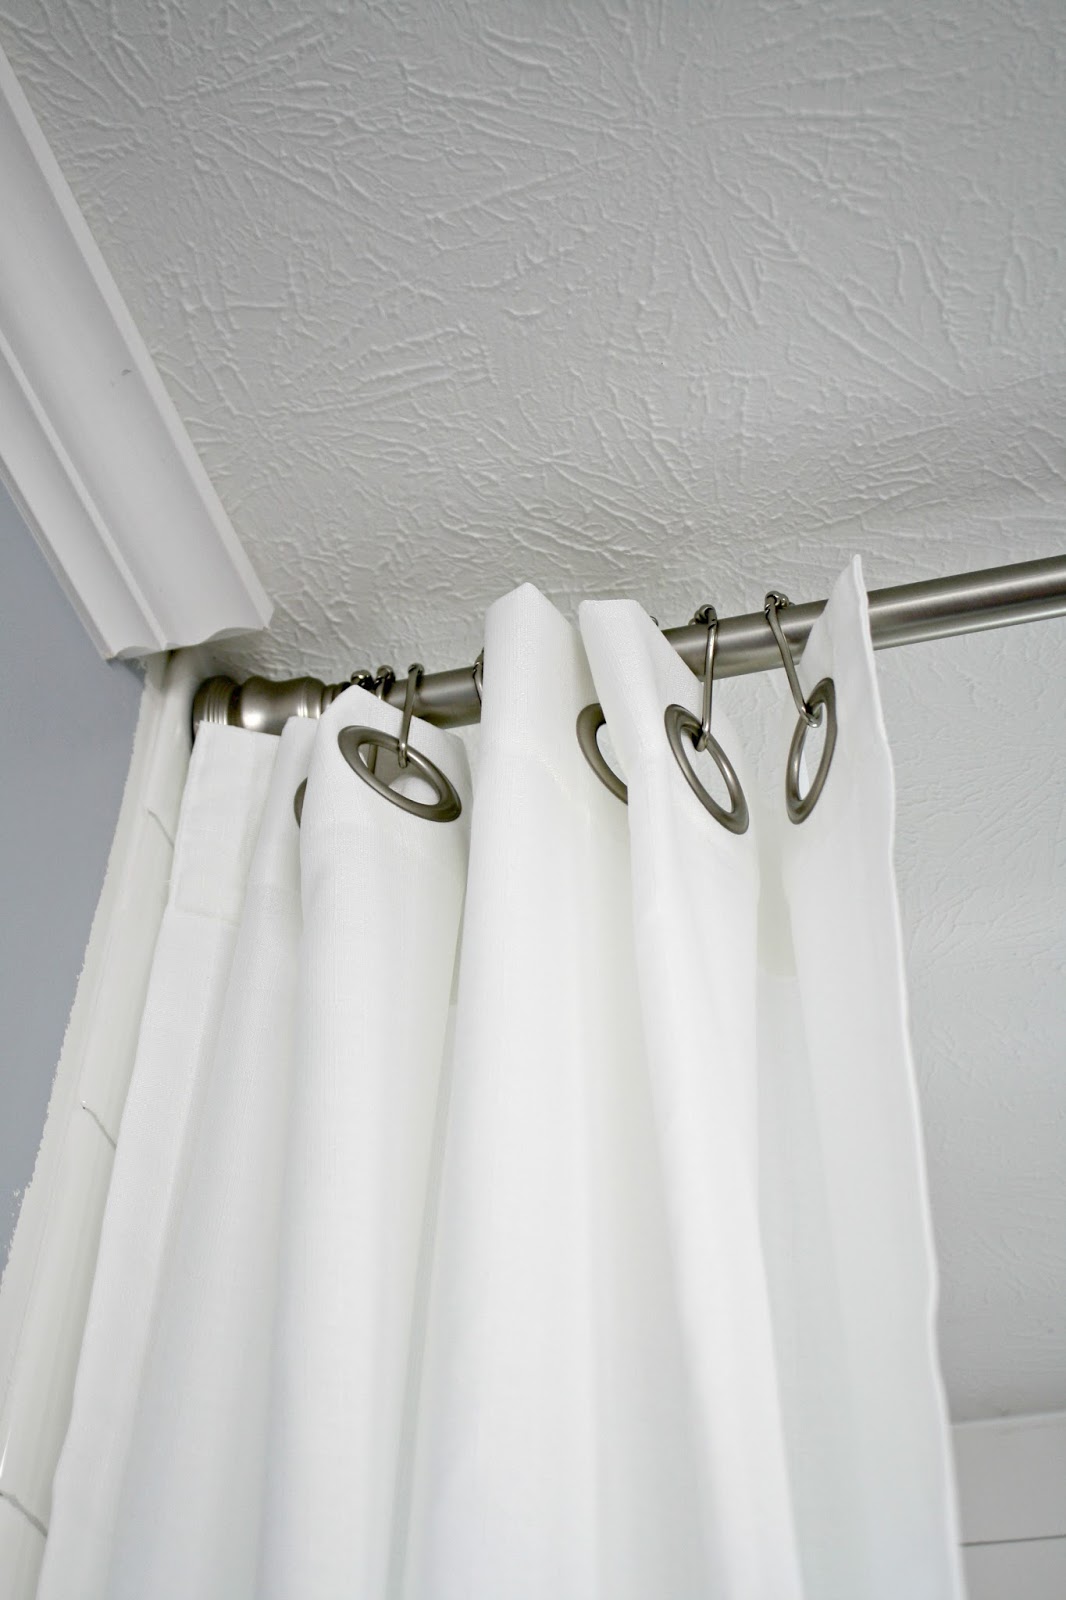 How To Hang Double Shower Curtains For, How To Hang Two Shower Curtains On One Rod